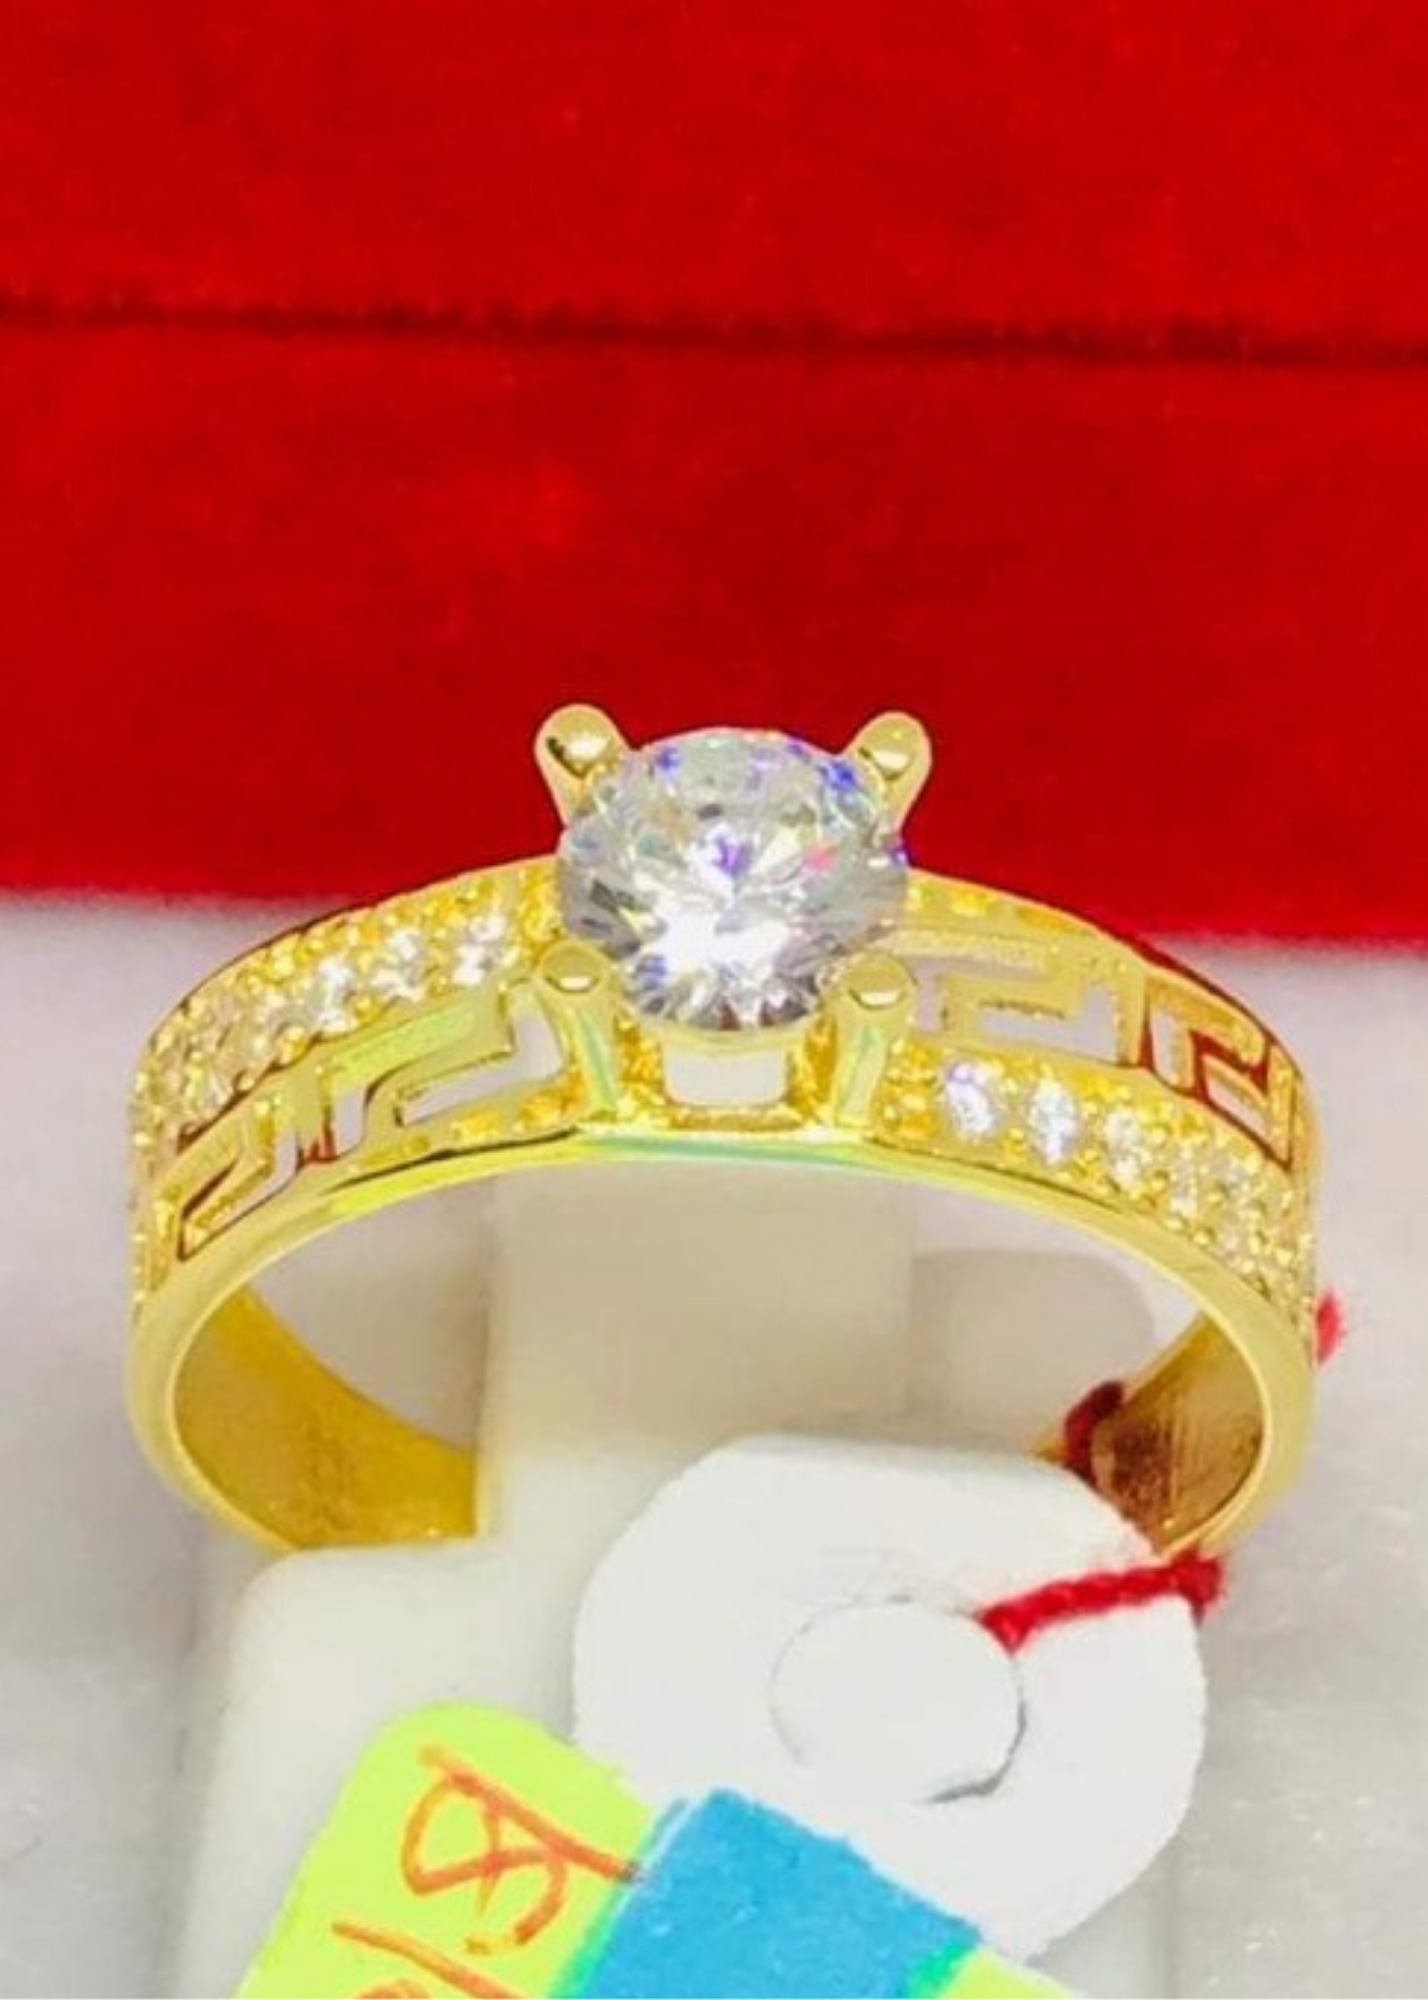 HARRIET Engagement Ring 18K Gold with Alternate Side Stones, Ladies Ring, Anniversary Gift Ring